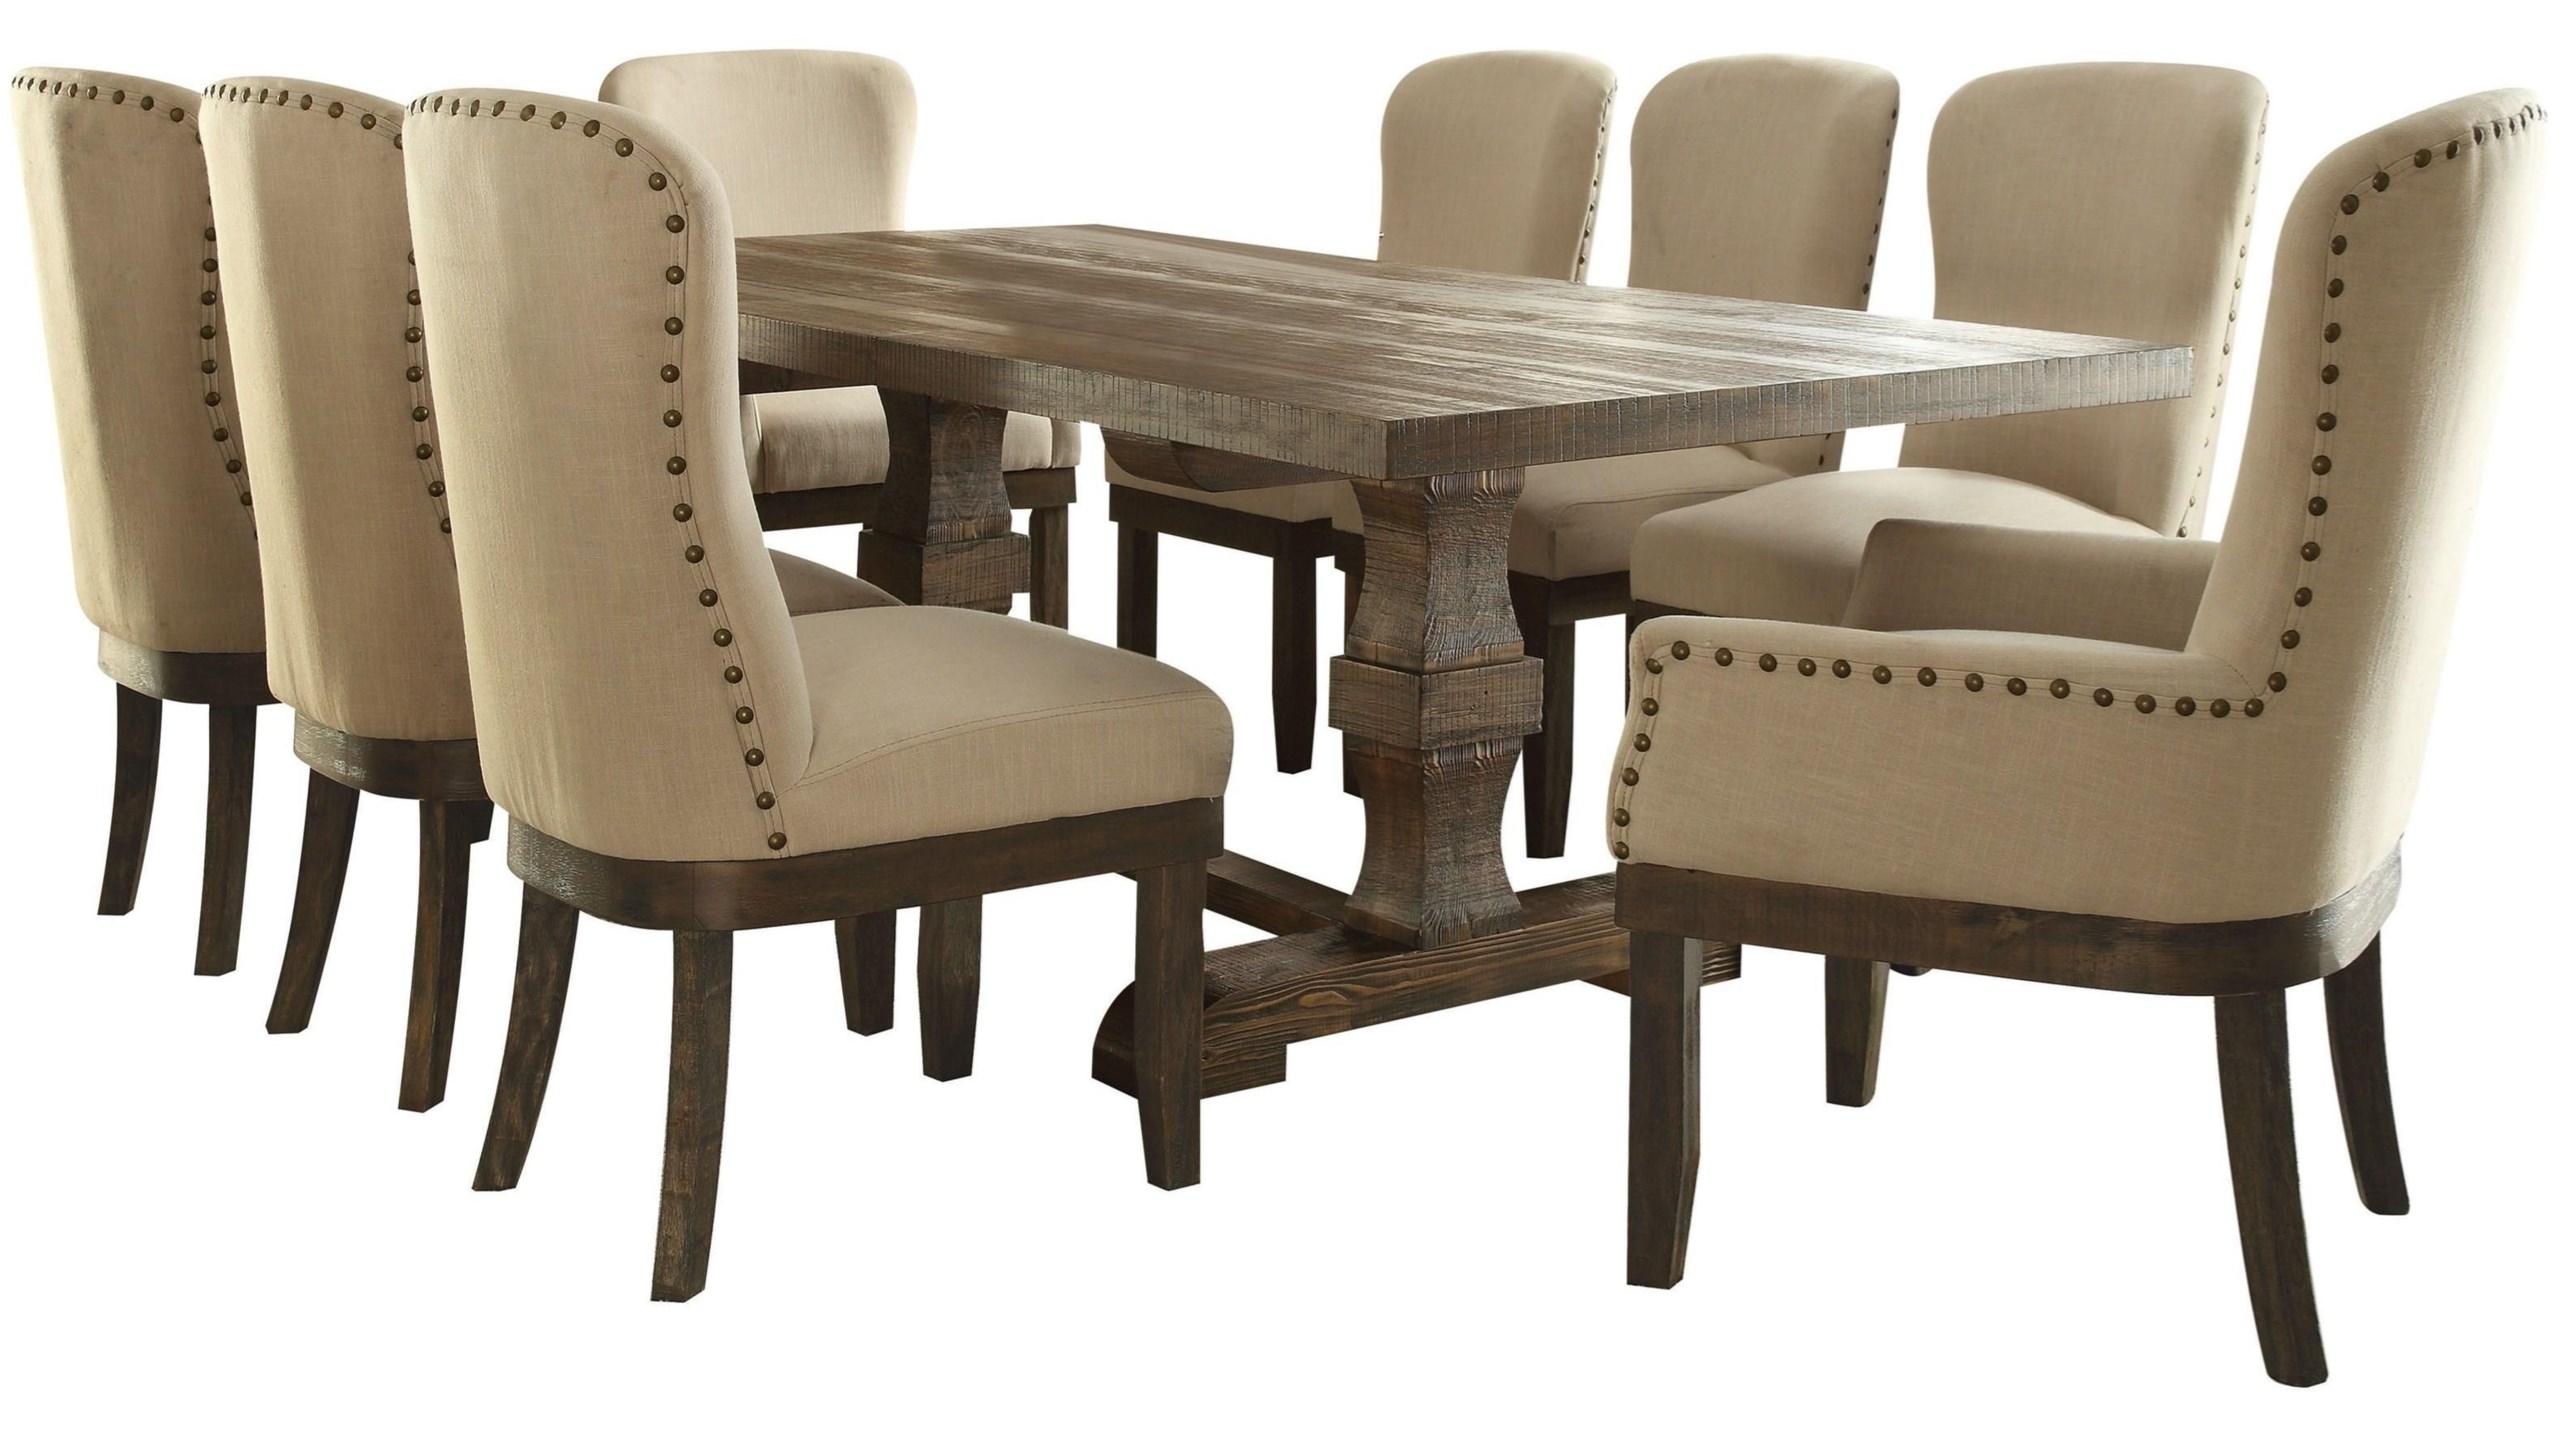 Traditional, Rustic Dining Room Set Landon 60737-7pcs in Brown Linen